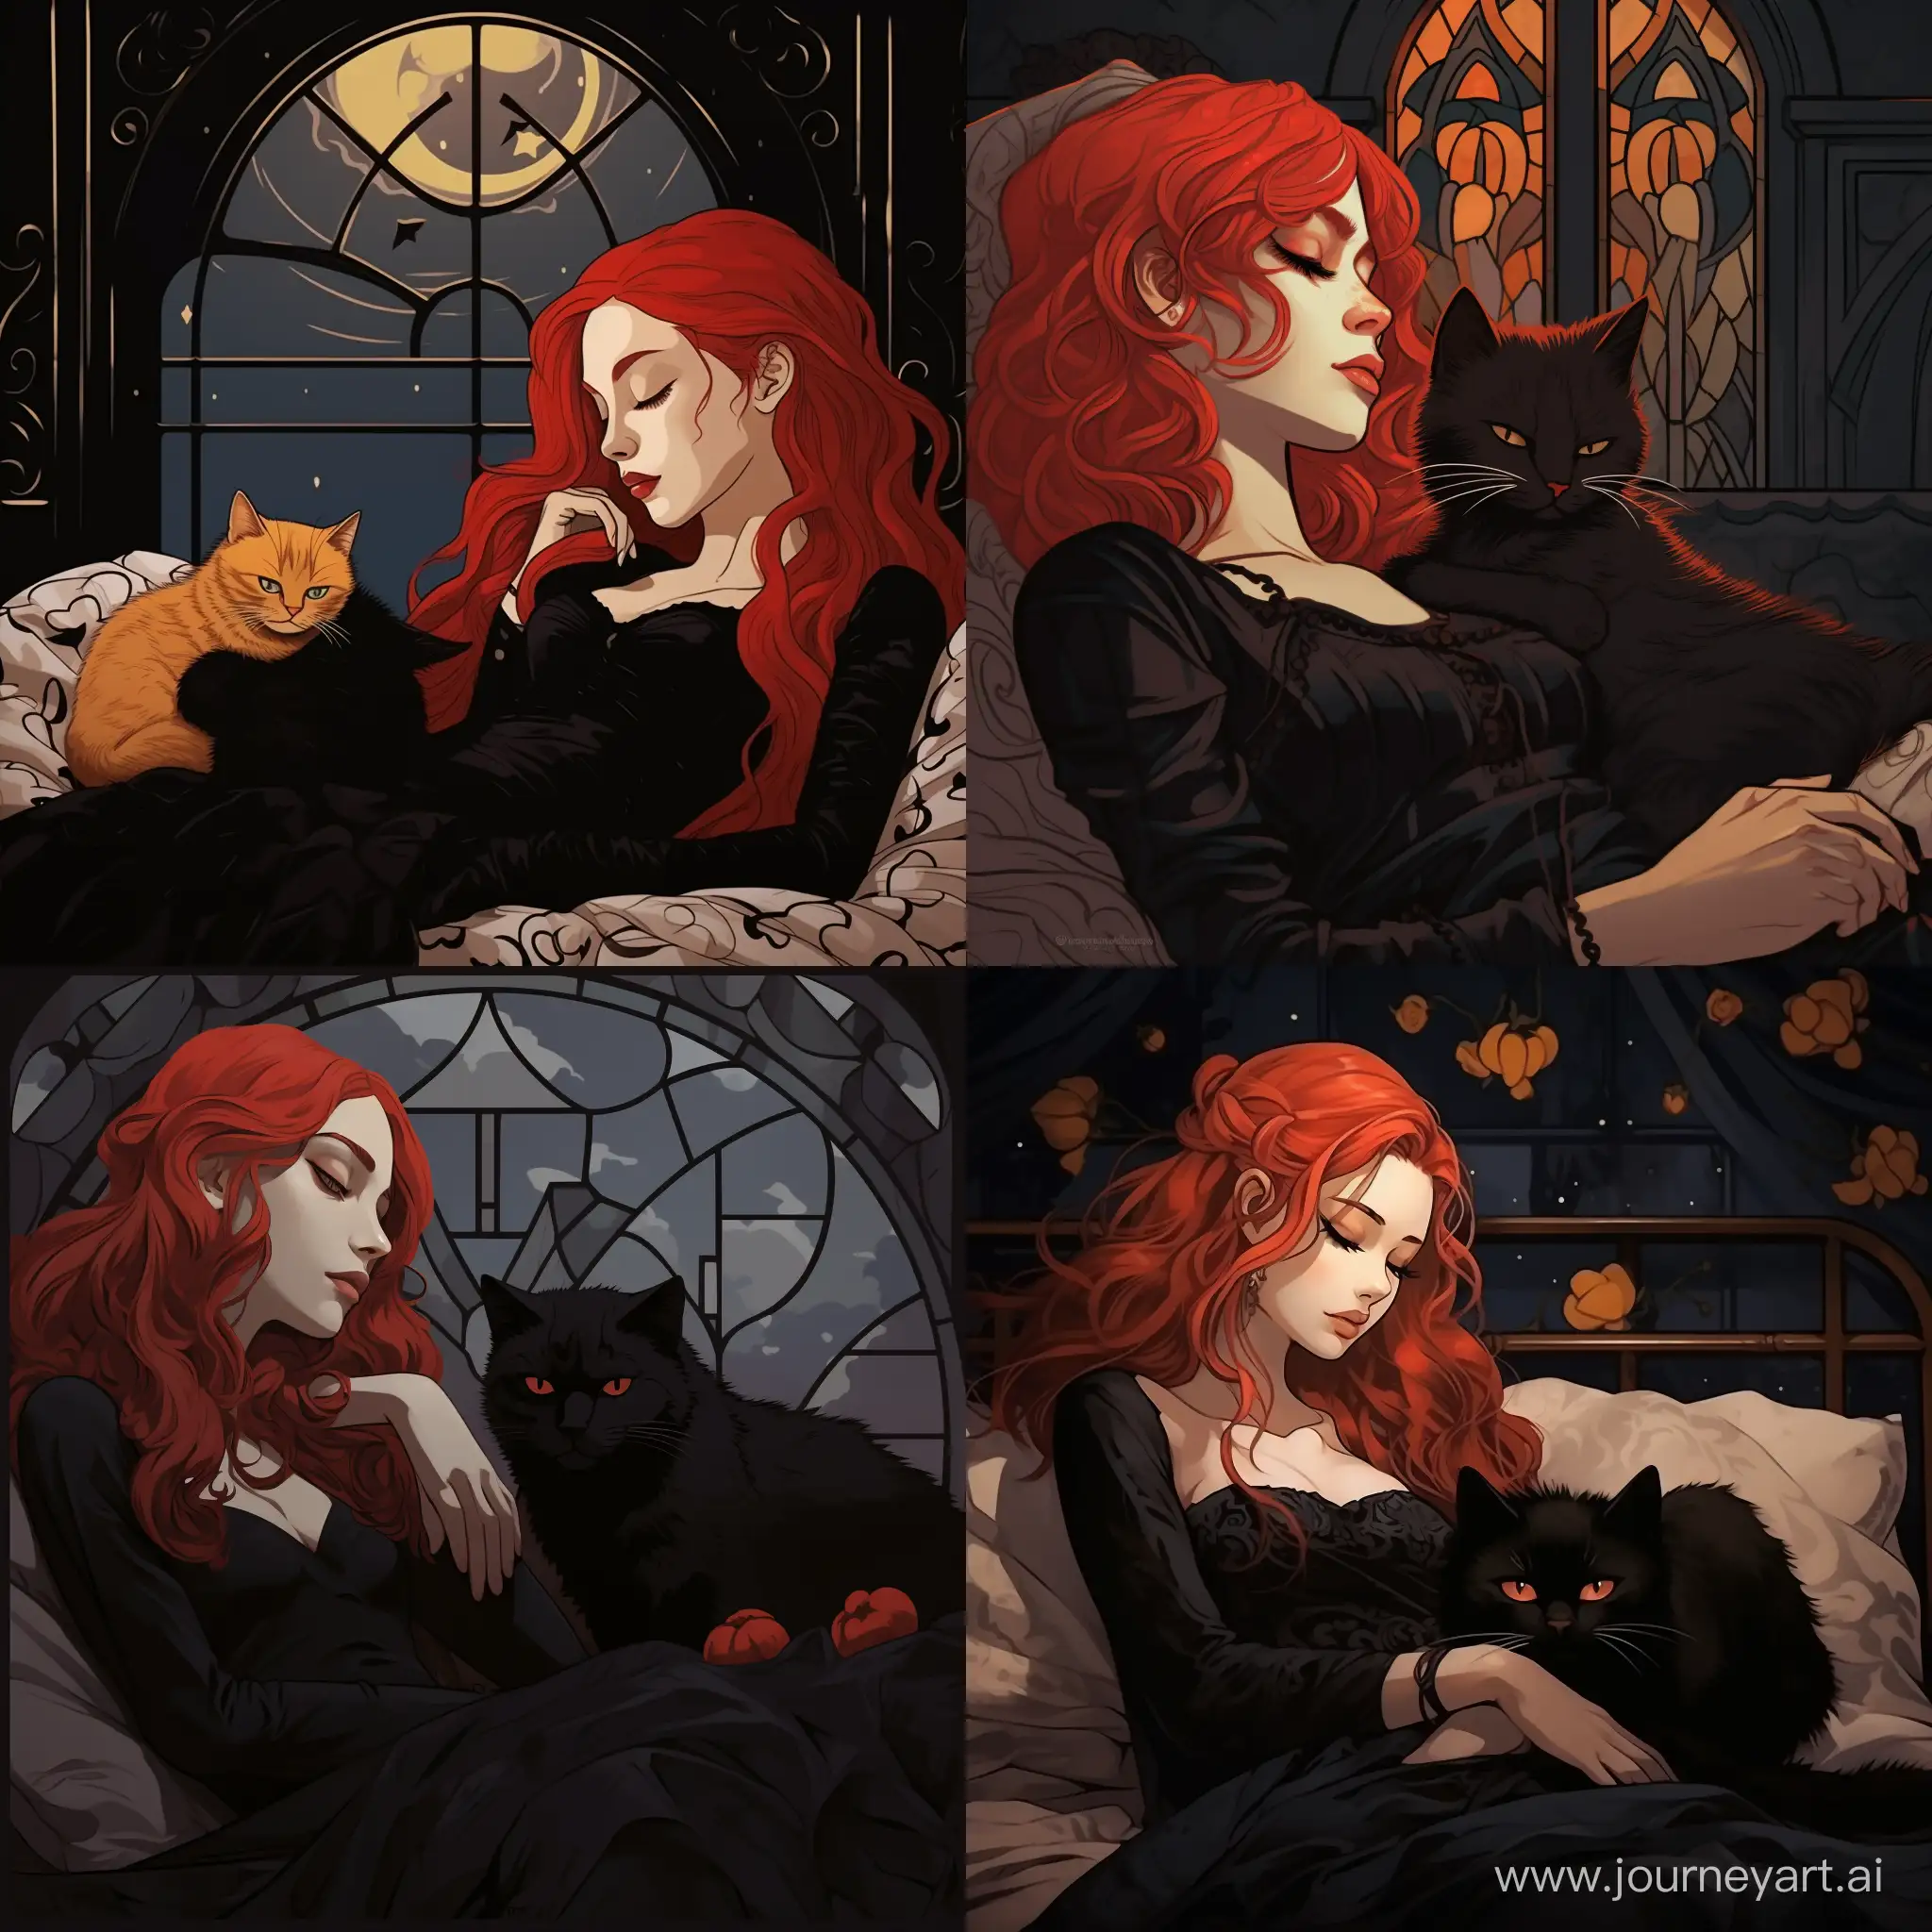 Enchanting-Slumber-RedHaired-Girl-in-Gothic-Attire-with-Cat